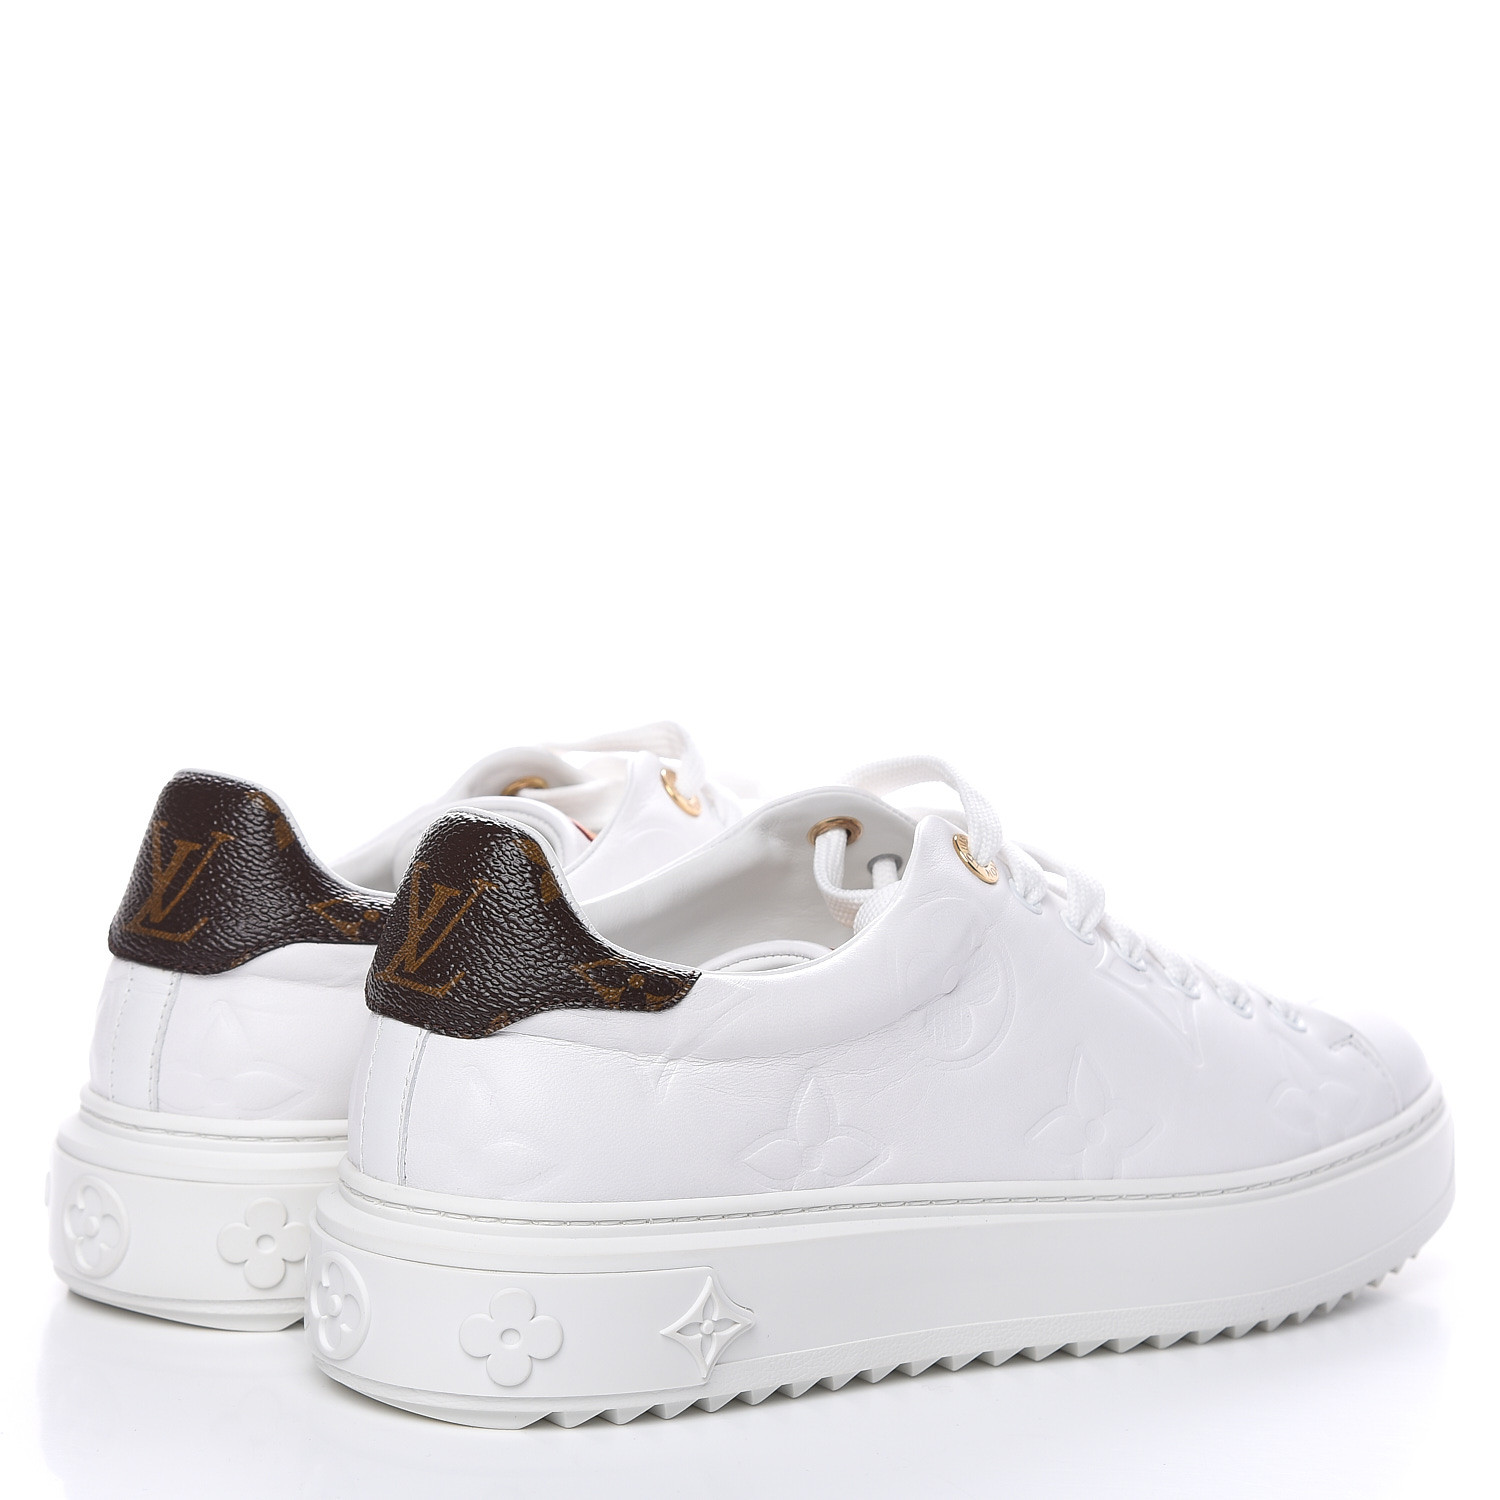 LOUIS VUITTON Lambskin Embossed Monogram Out Sneakers 40.5 White 480982 | FASHIONPHILE